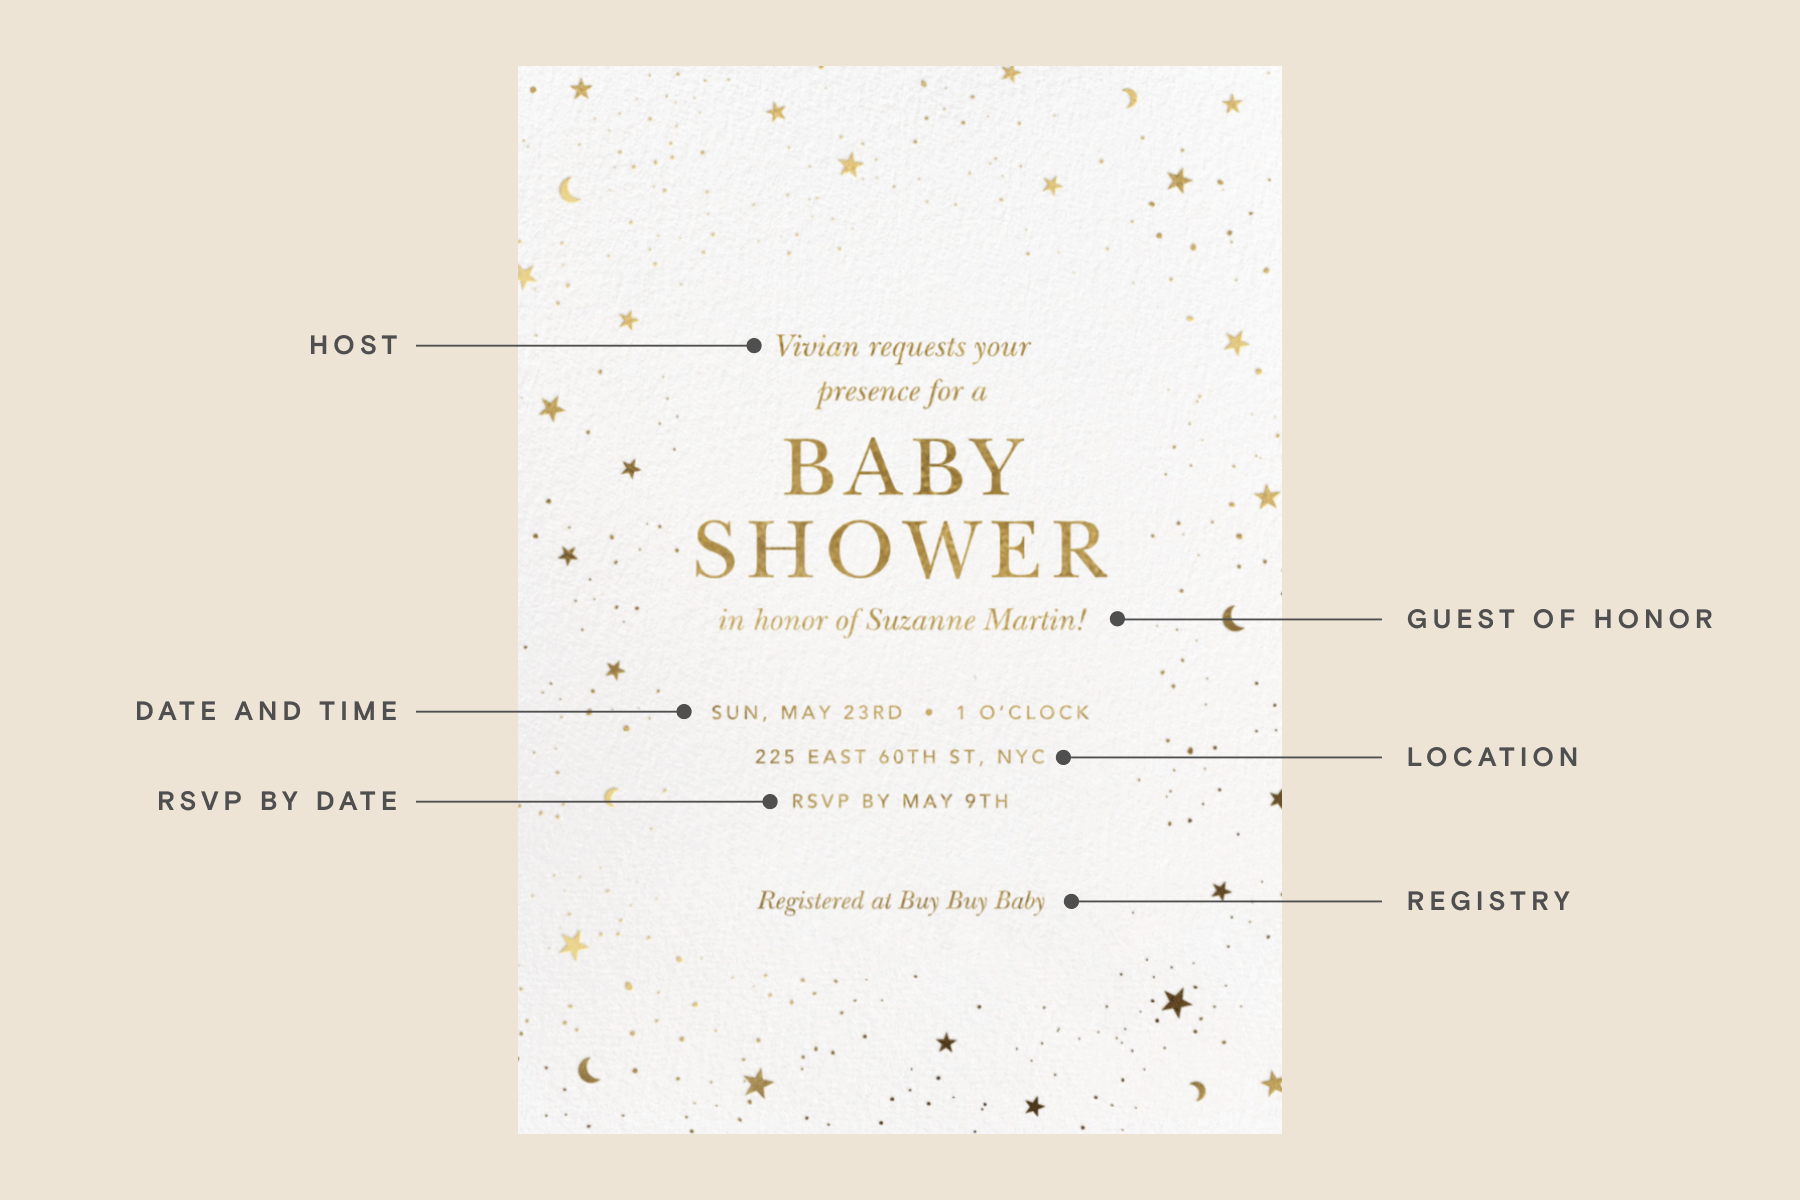 A baby shower invitation with small gold stars and moons, dissected into party detail elements. 